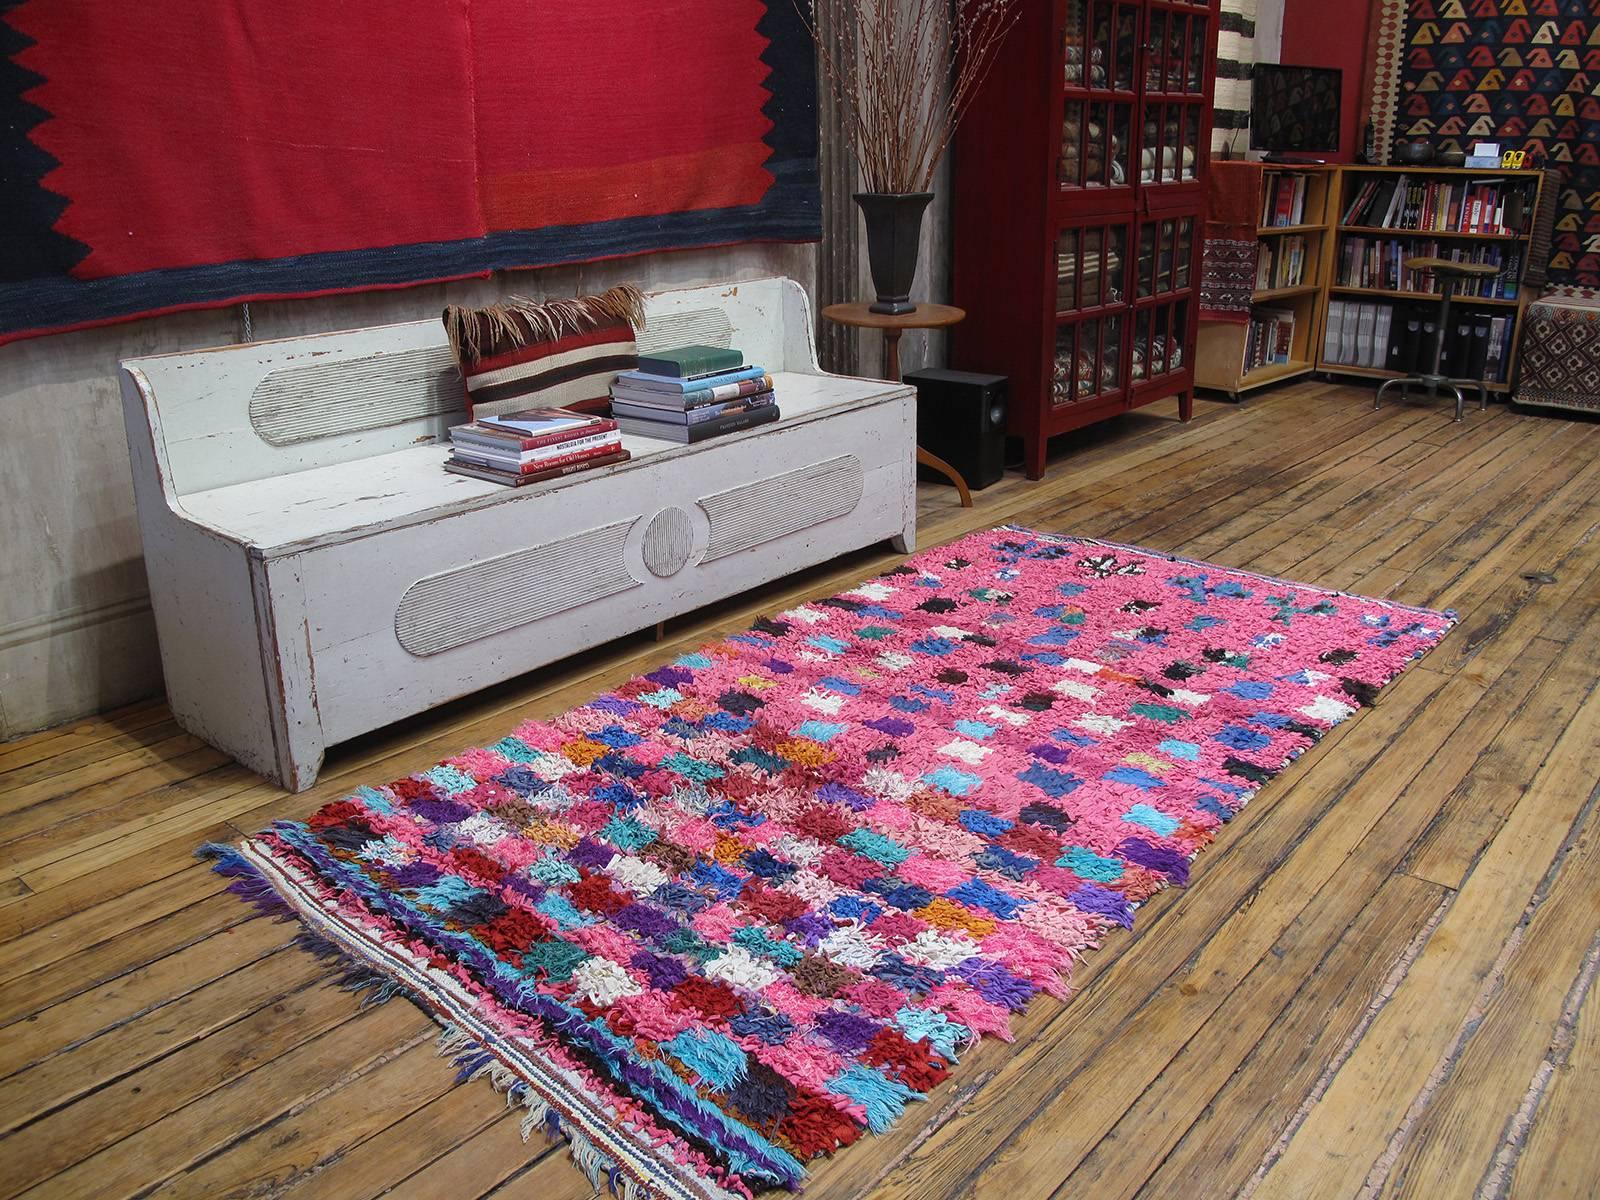 A Moroccan rag rug, woven entirely with cut-up pieces of fabric from old clothes, etc. - boucherouite means rag or torn cloth in Moroccan Arabic. A relatively recent phenomenon, such weavings are products of socio-economic changes in Moroccan